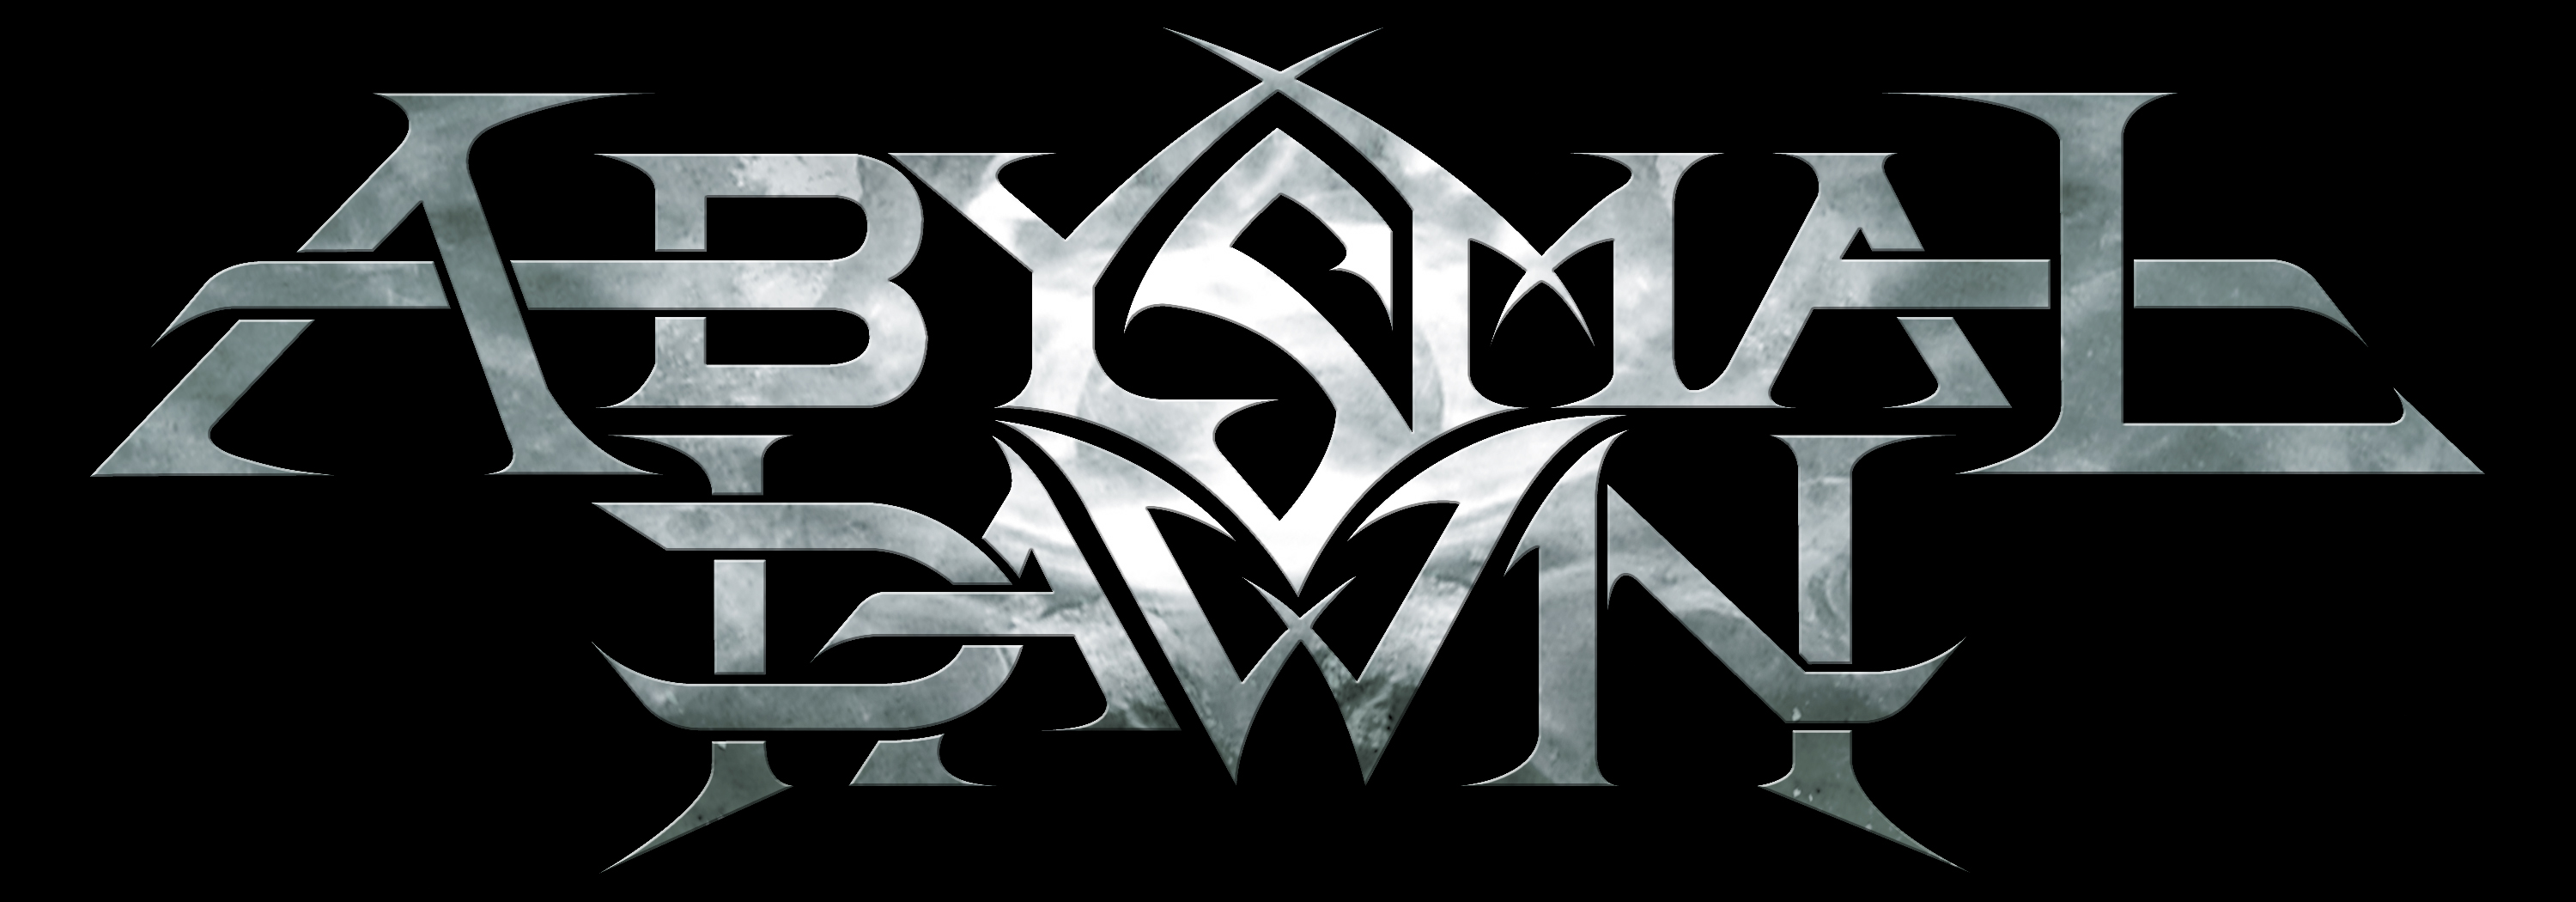 ABYSMAL DAWN releases “Hedonistic” !